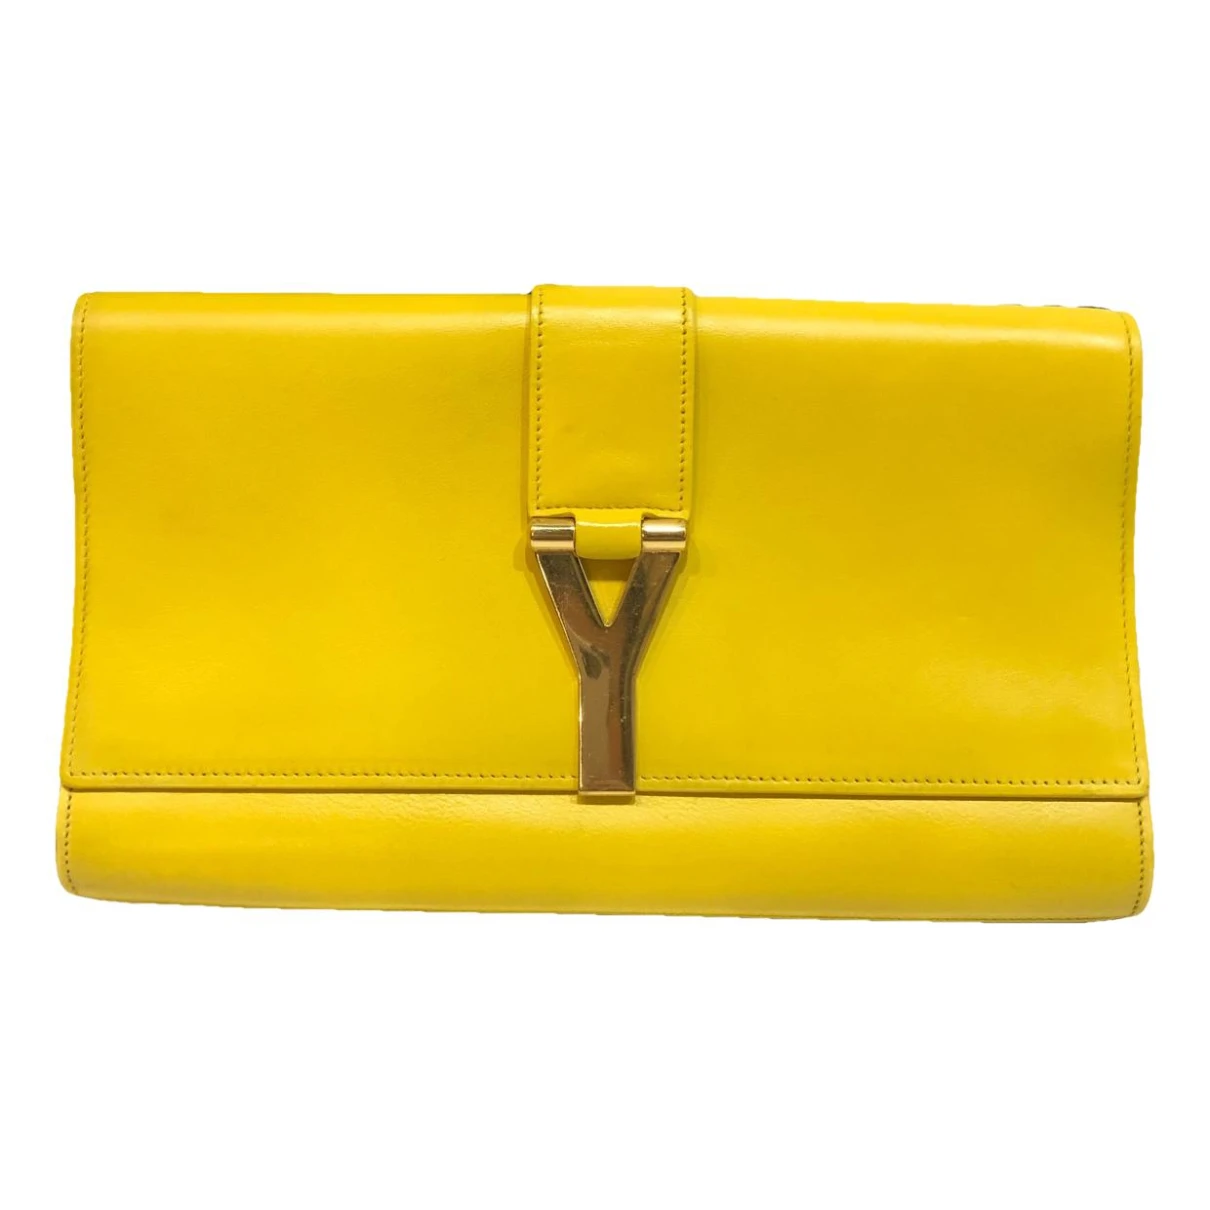 Pre-owned Saint Laurent Sade Pochette Enveloppe Leather Clutch Bag In Yellow